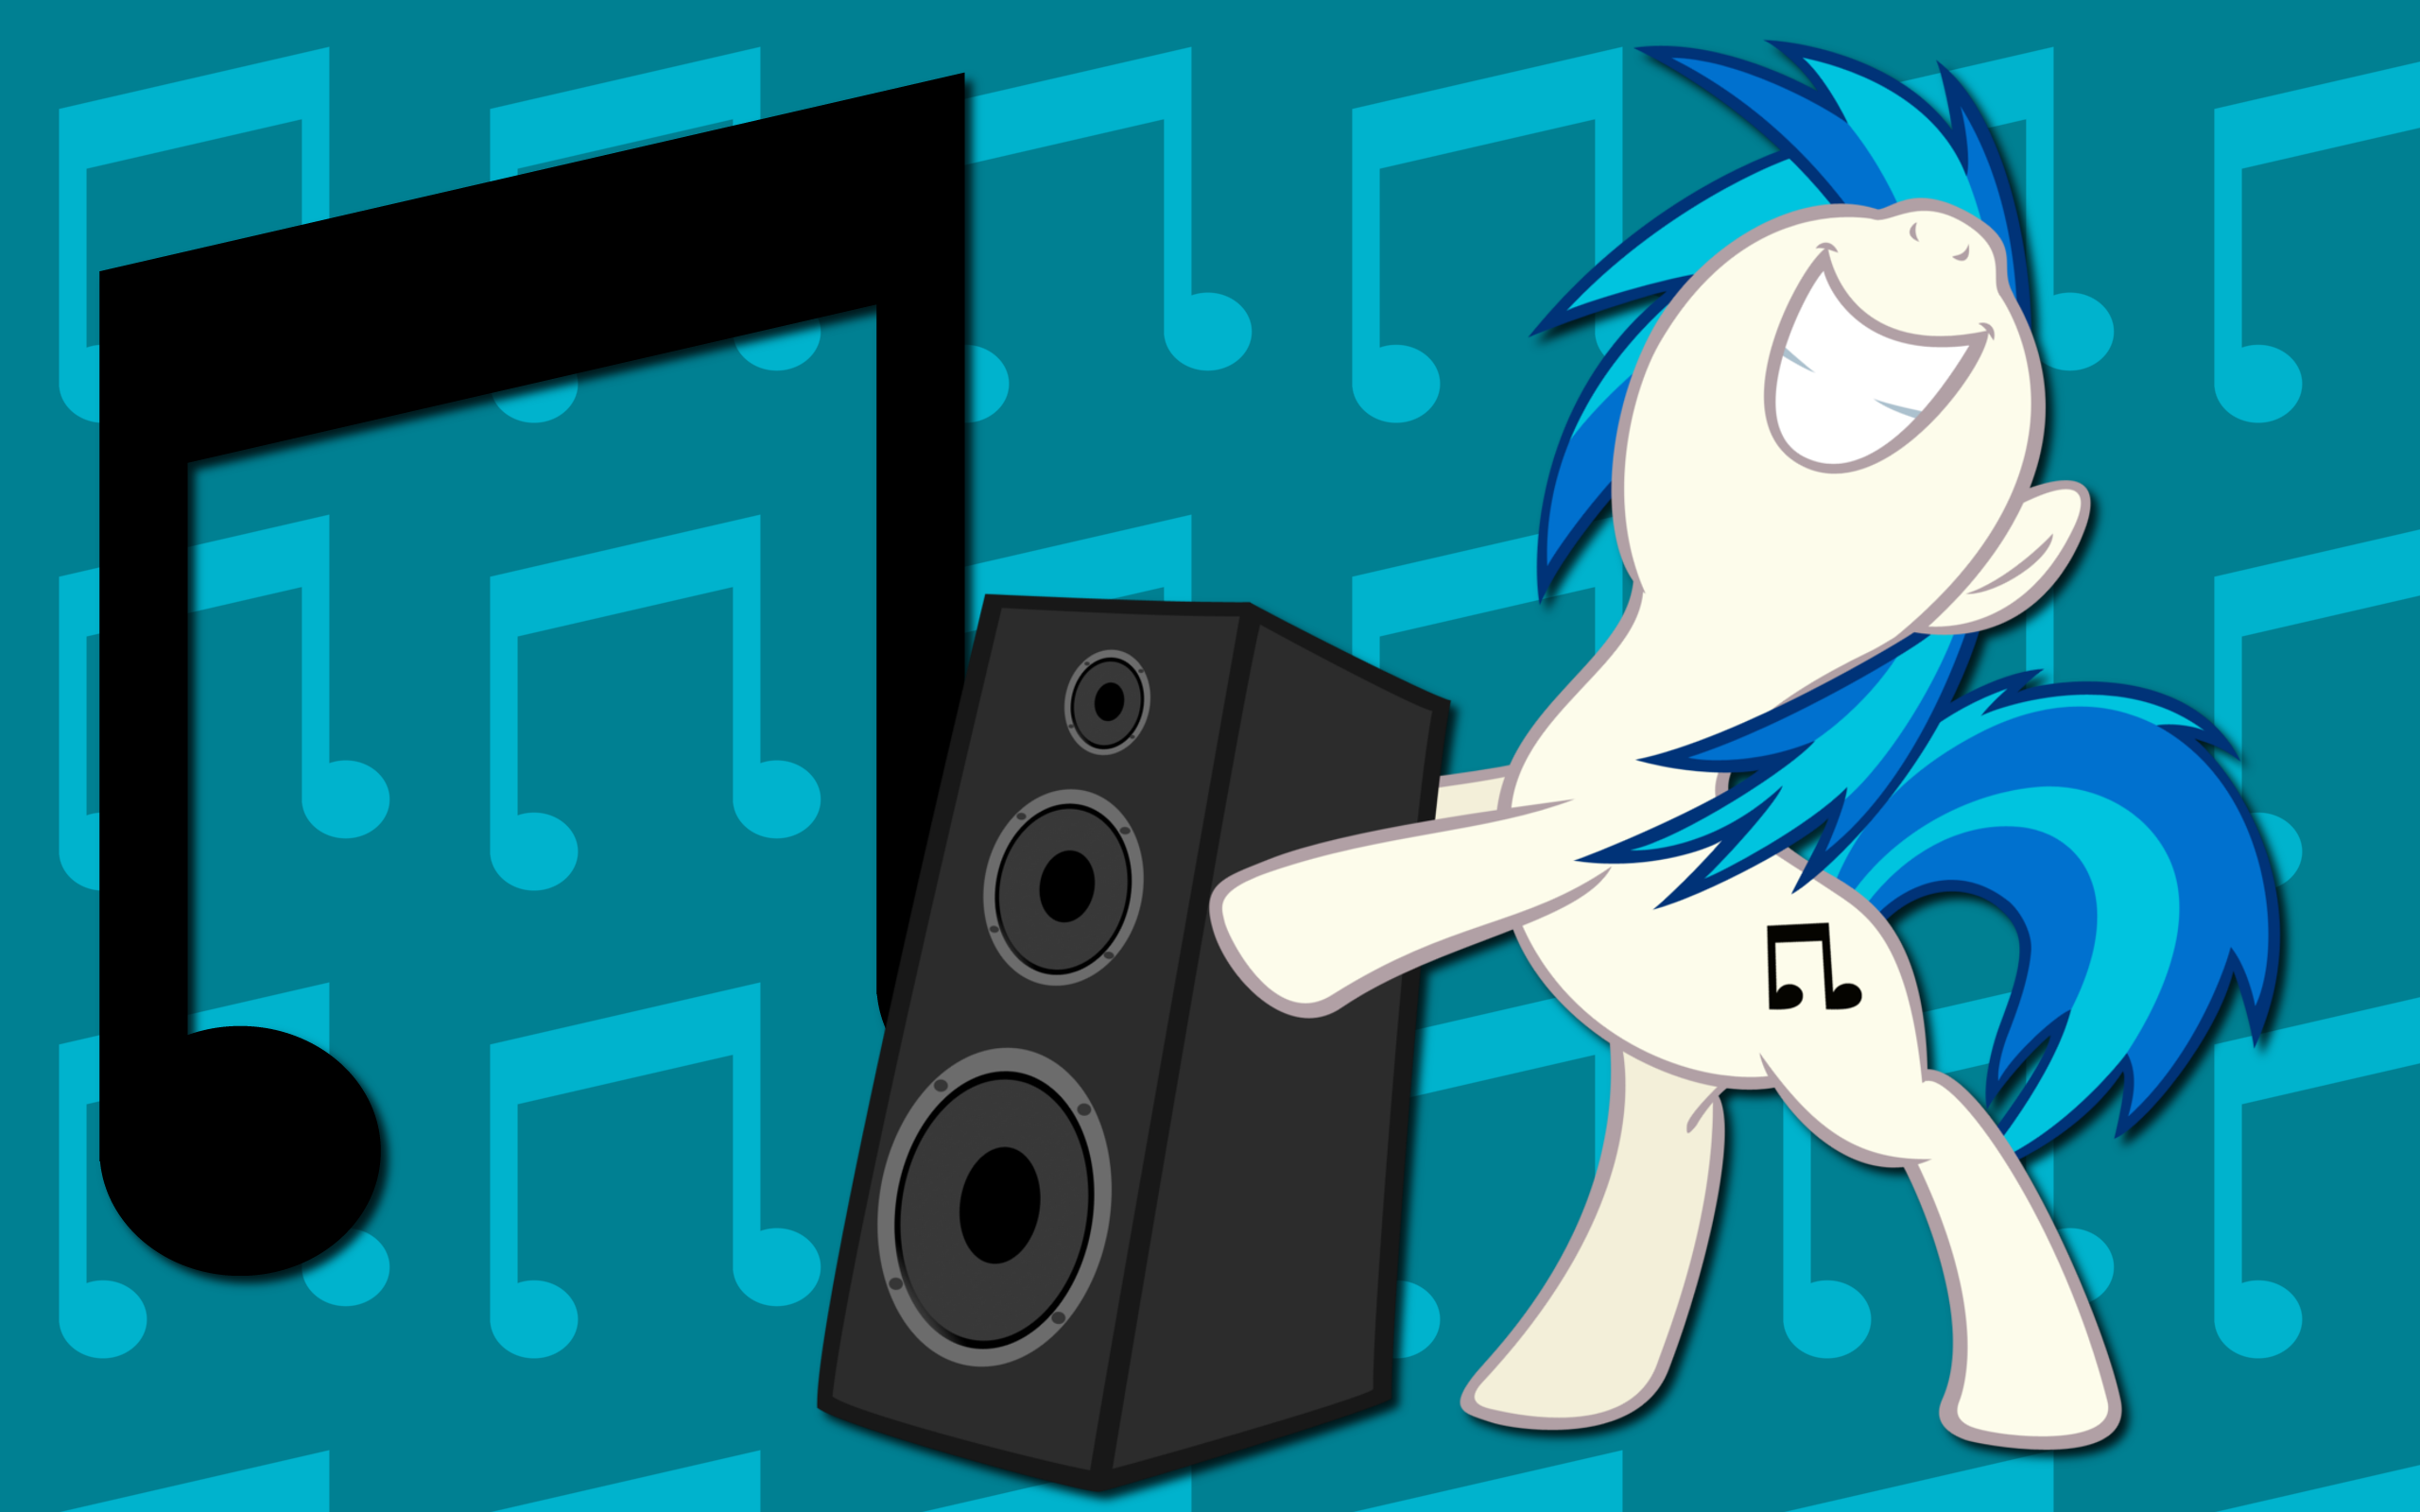 Vinyl Scratch WP by AliceHumanSacrifice0, LVGCombine and ooklah